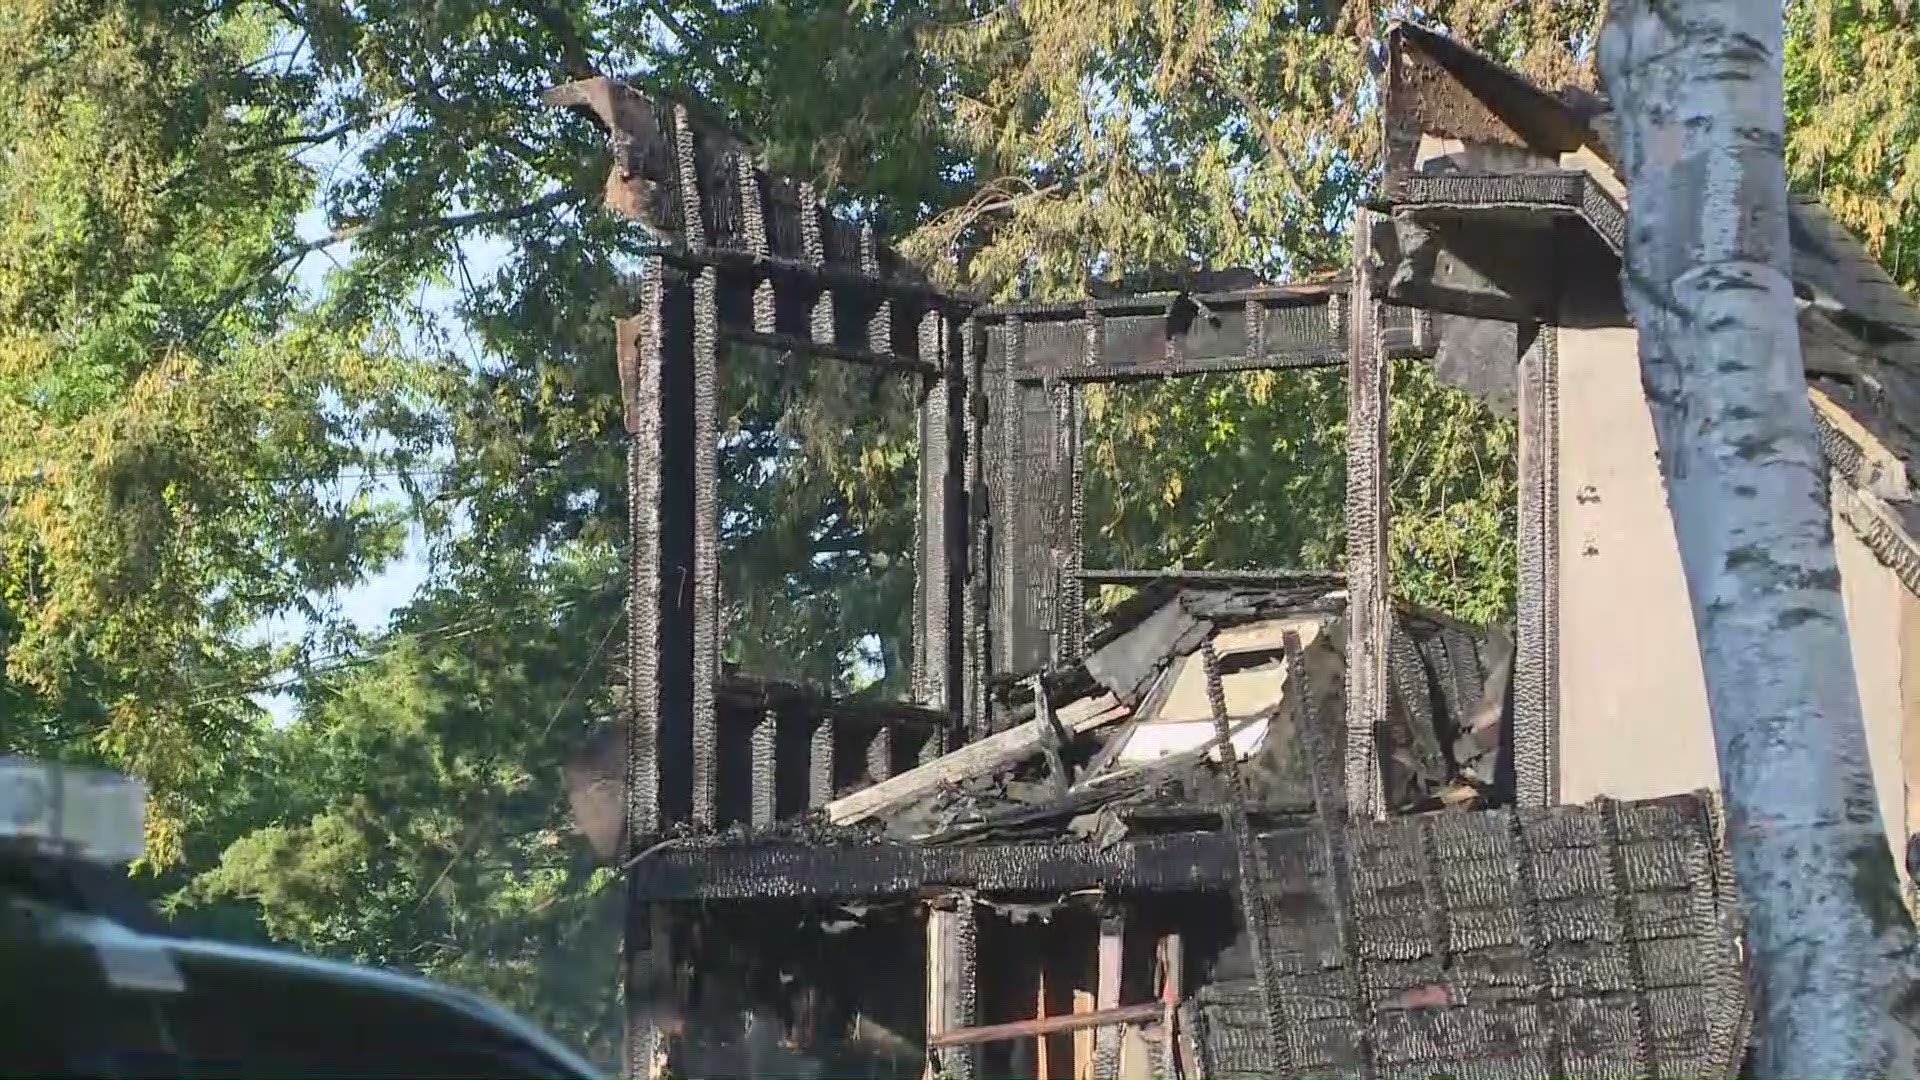 The State Fire Marshal's Office is investigating after a 2-story home in Montgomery was leveled by a reported explosion and fire.